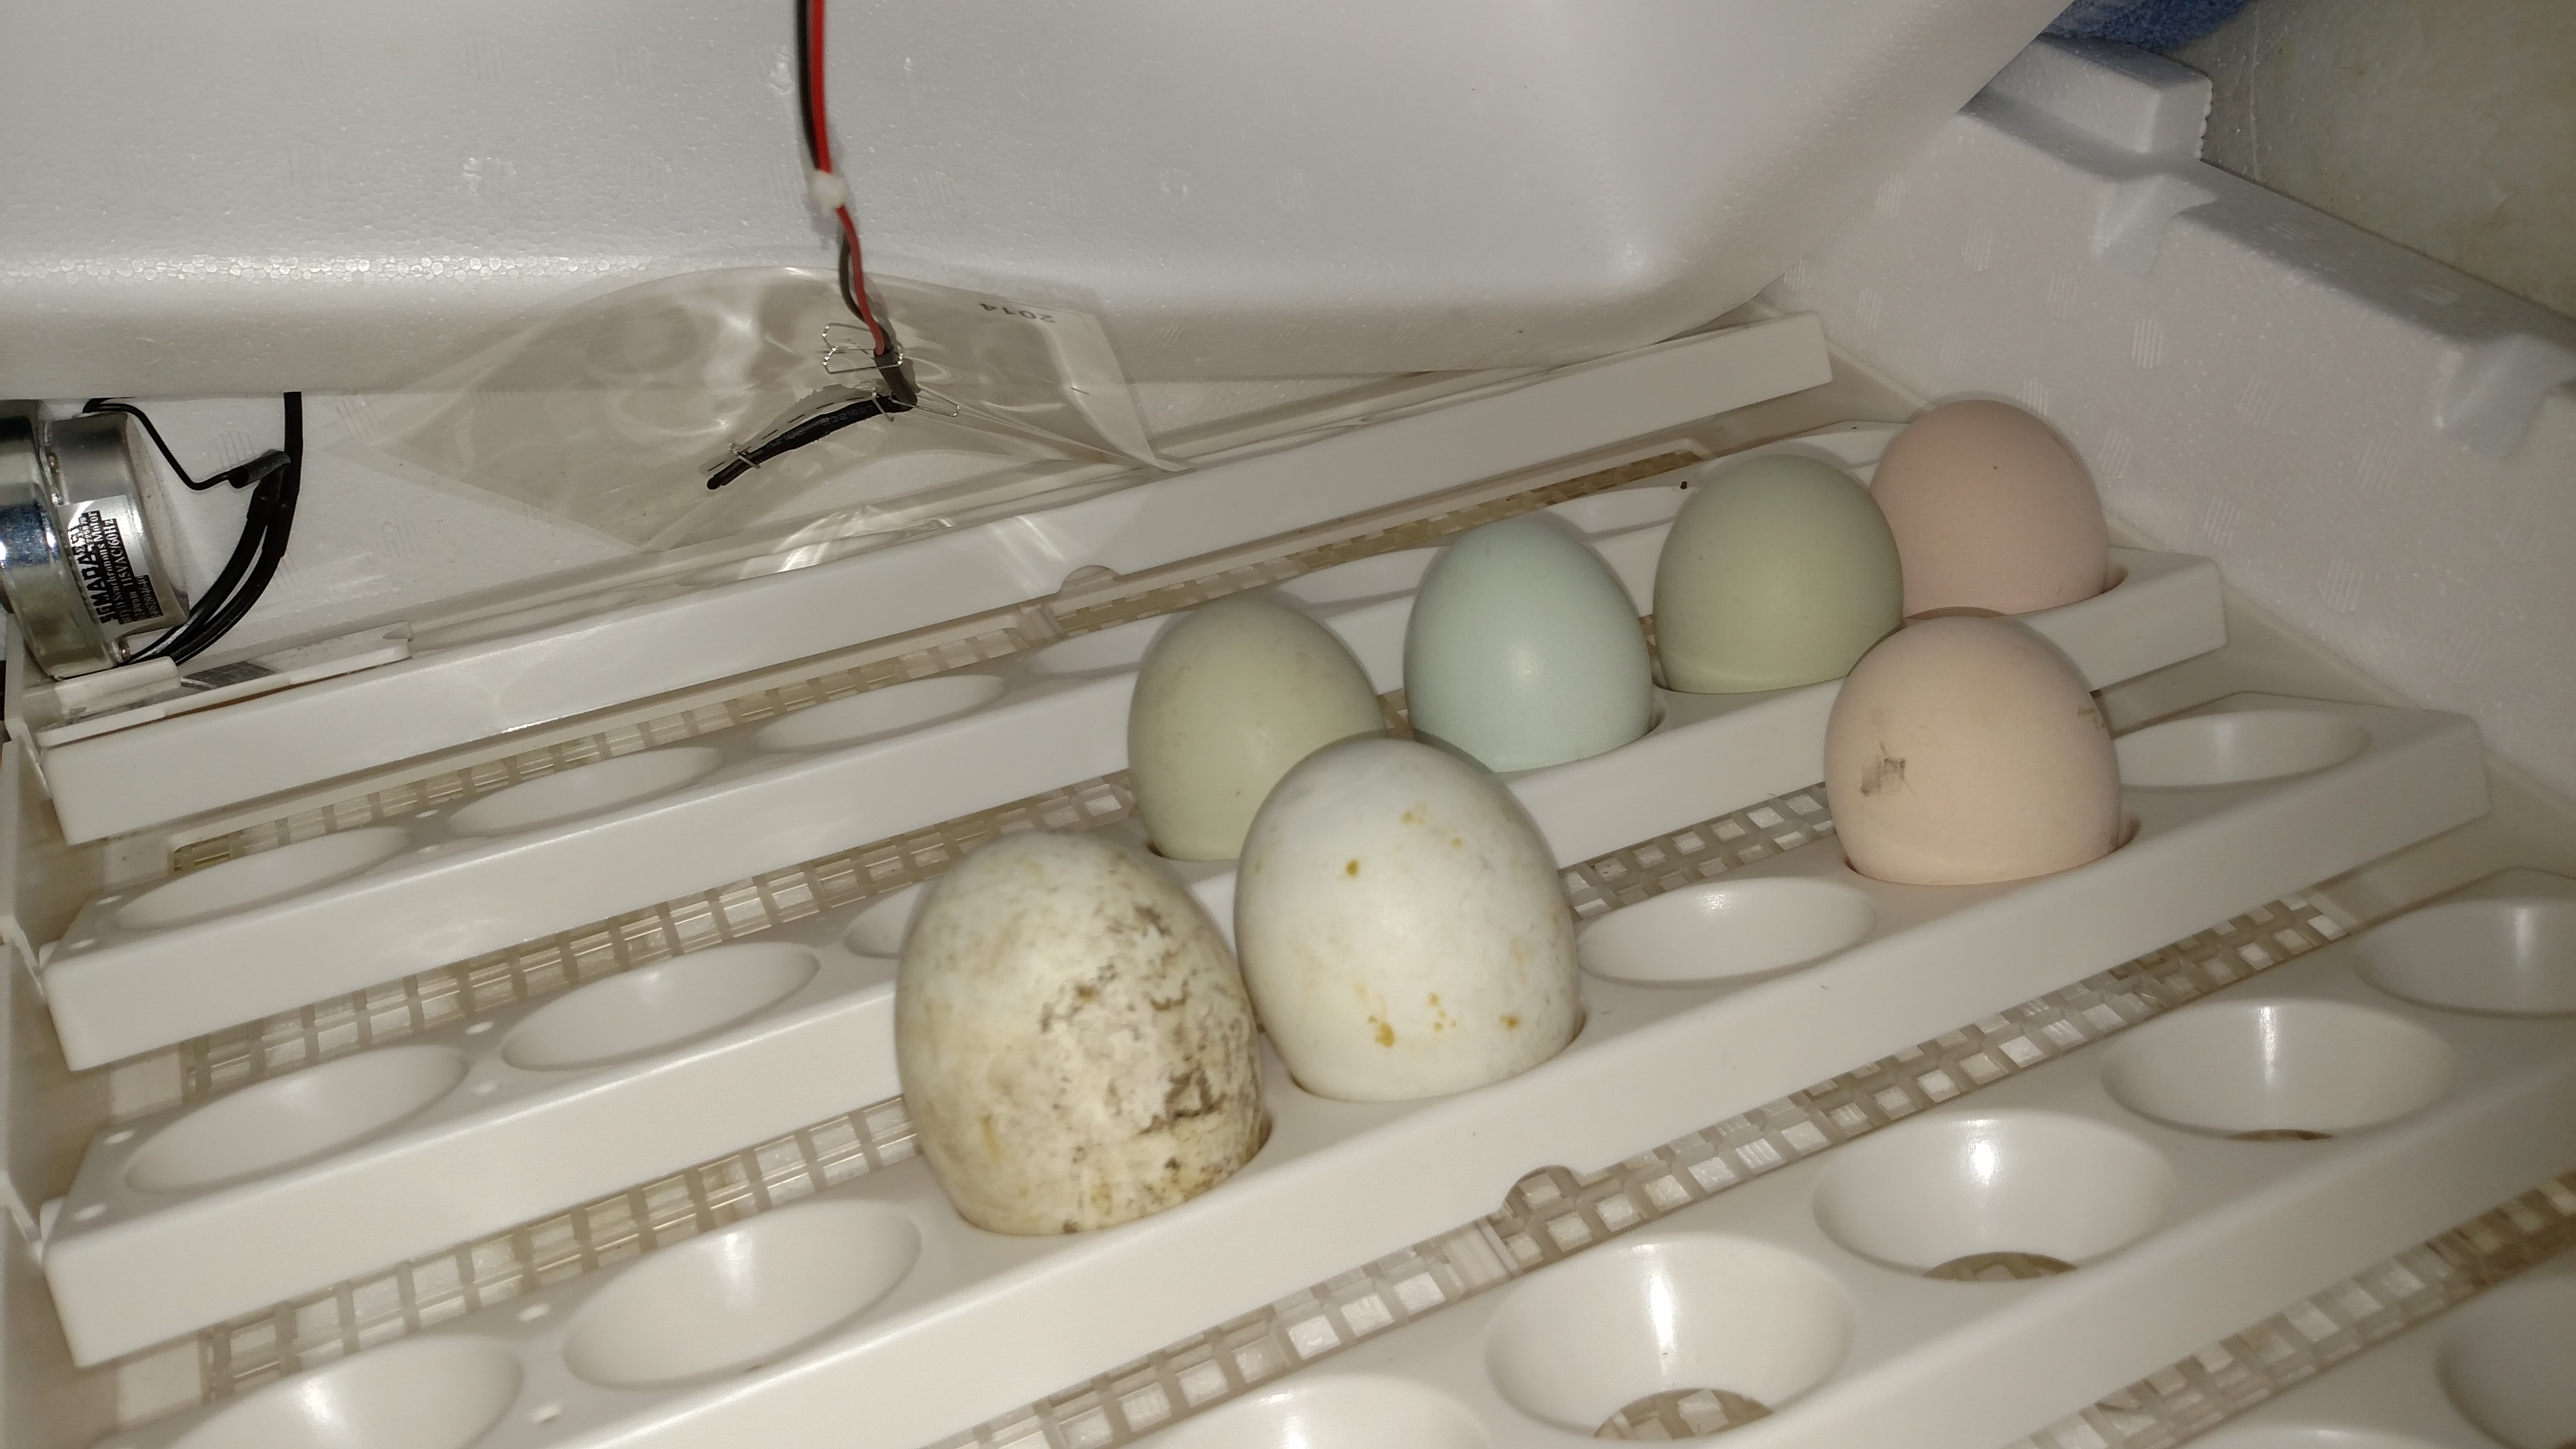 New incubator going with duck & chicken eggs.